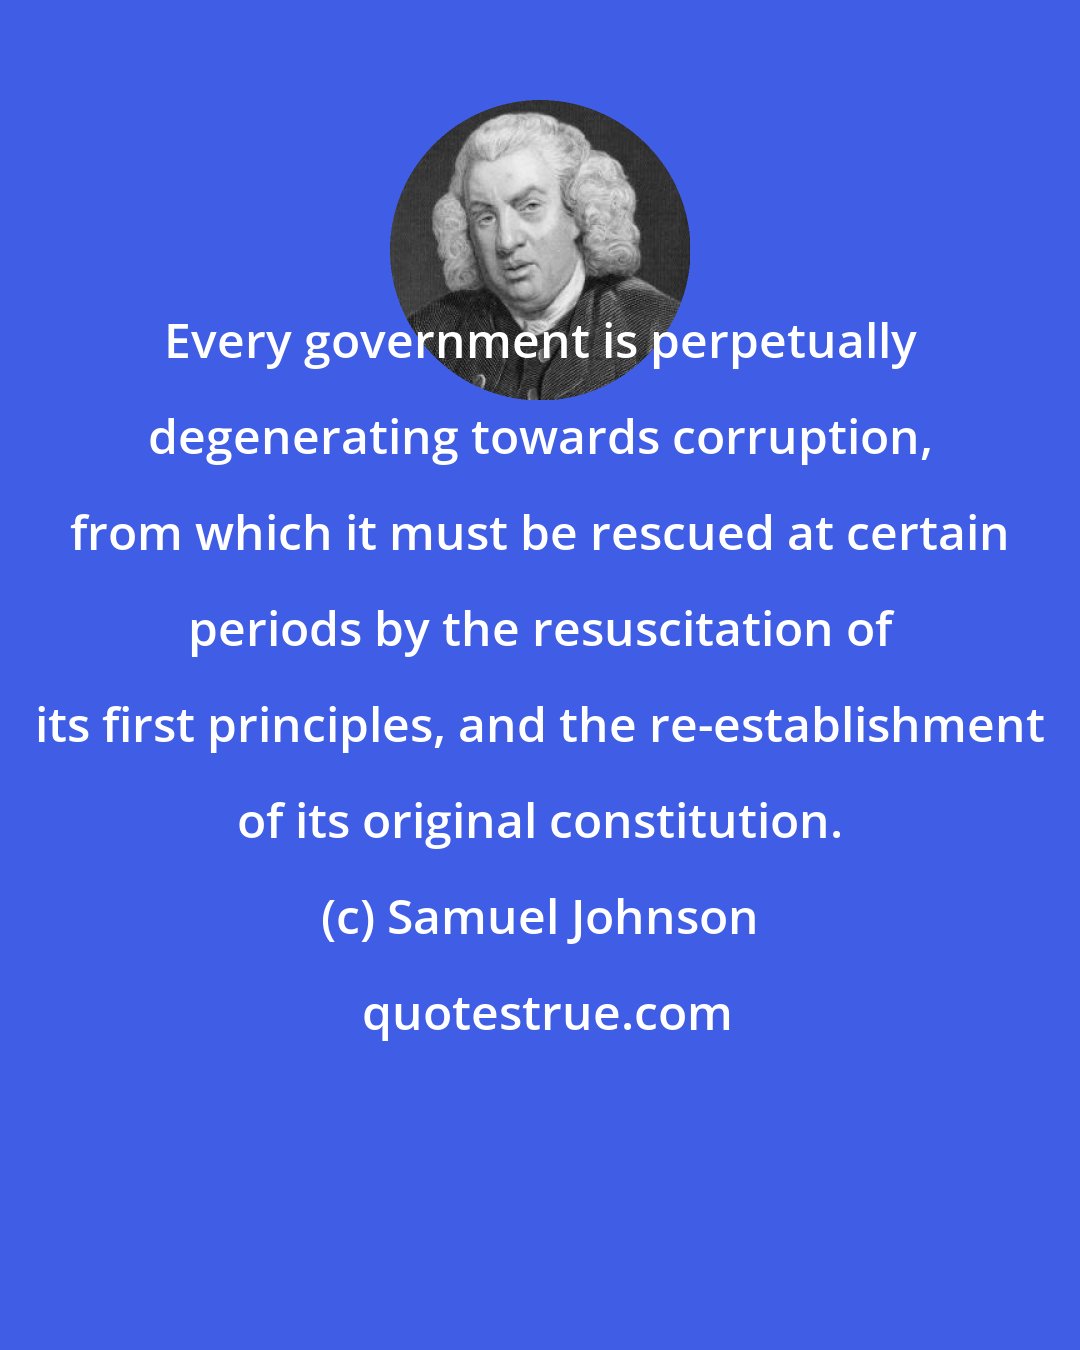 Samuel Johnson: Every government is perpetually degenerating towards corruption, from which it must be rescued at certain periods by the resuscitation of its first principles, and the re-establishment of its original constitution.